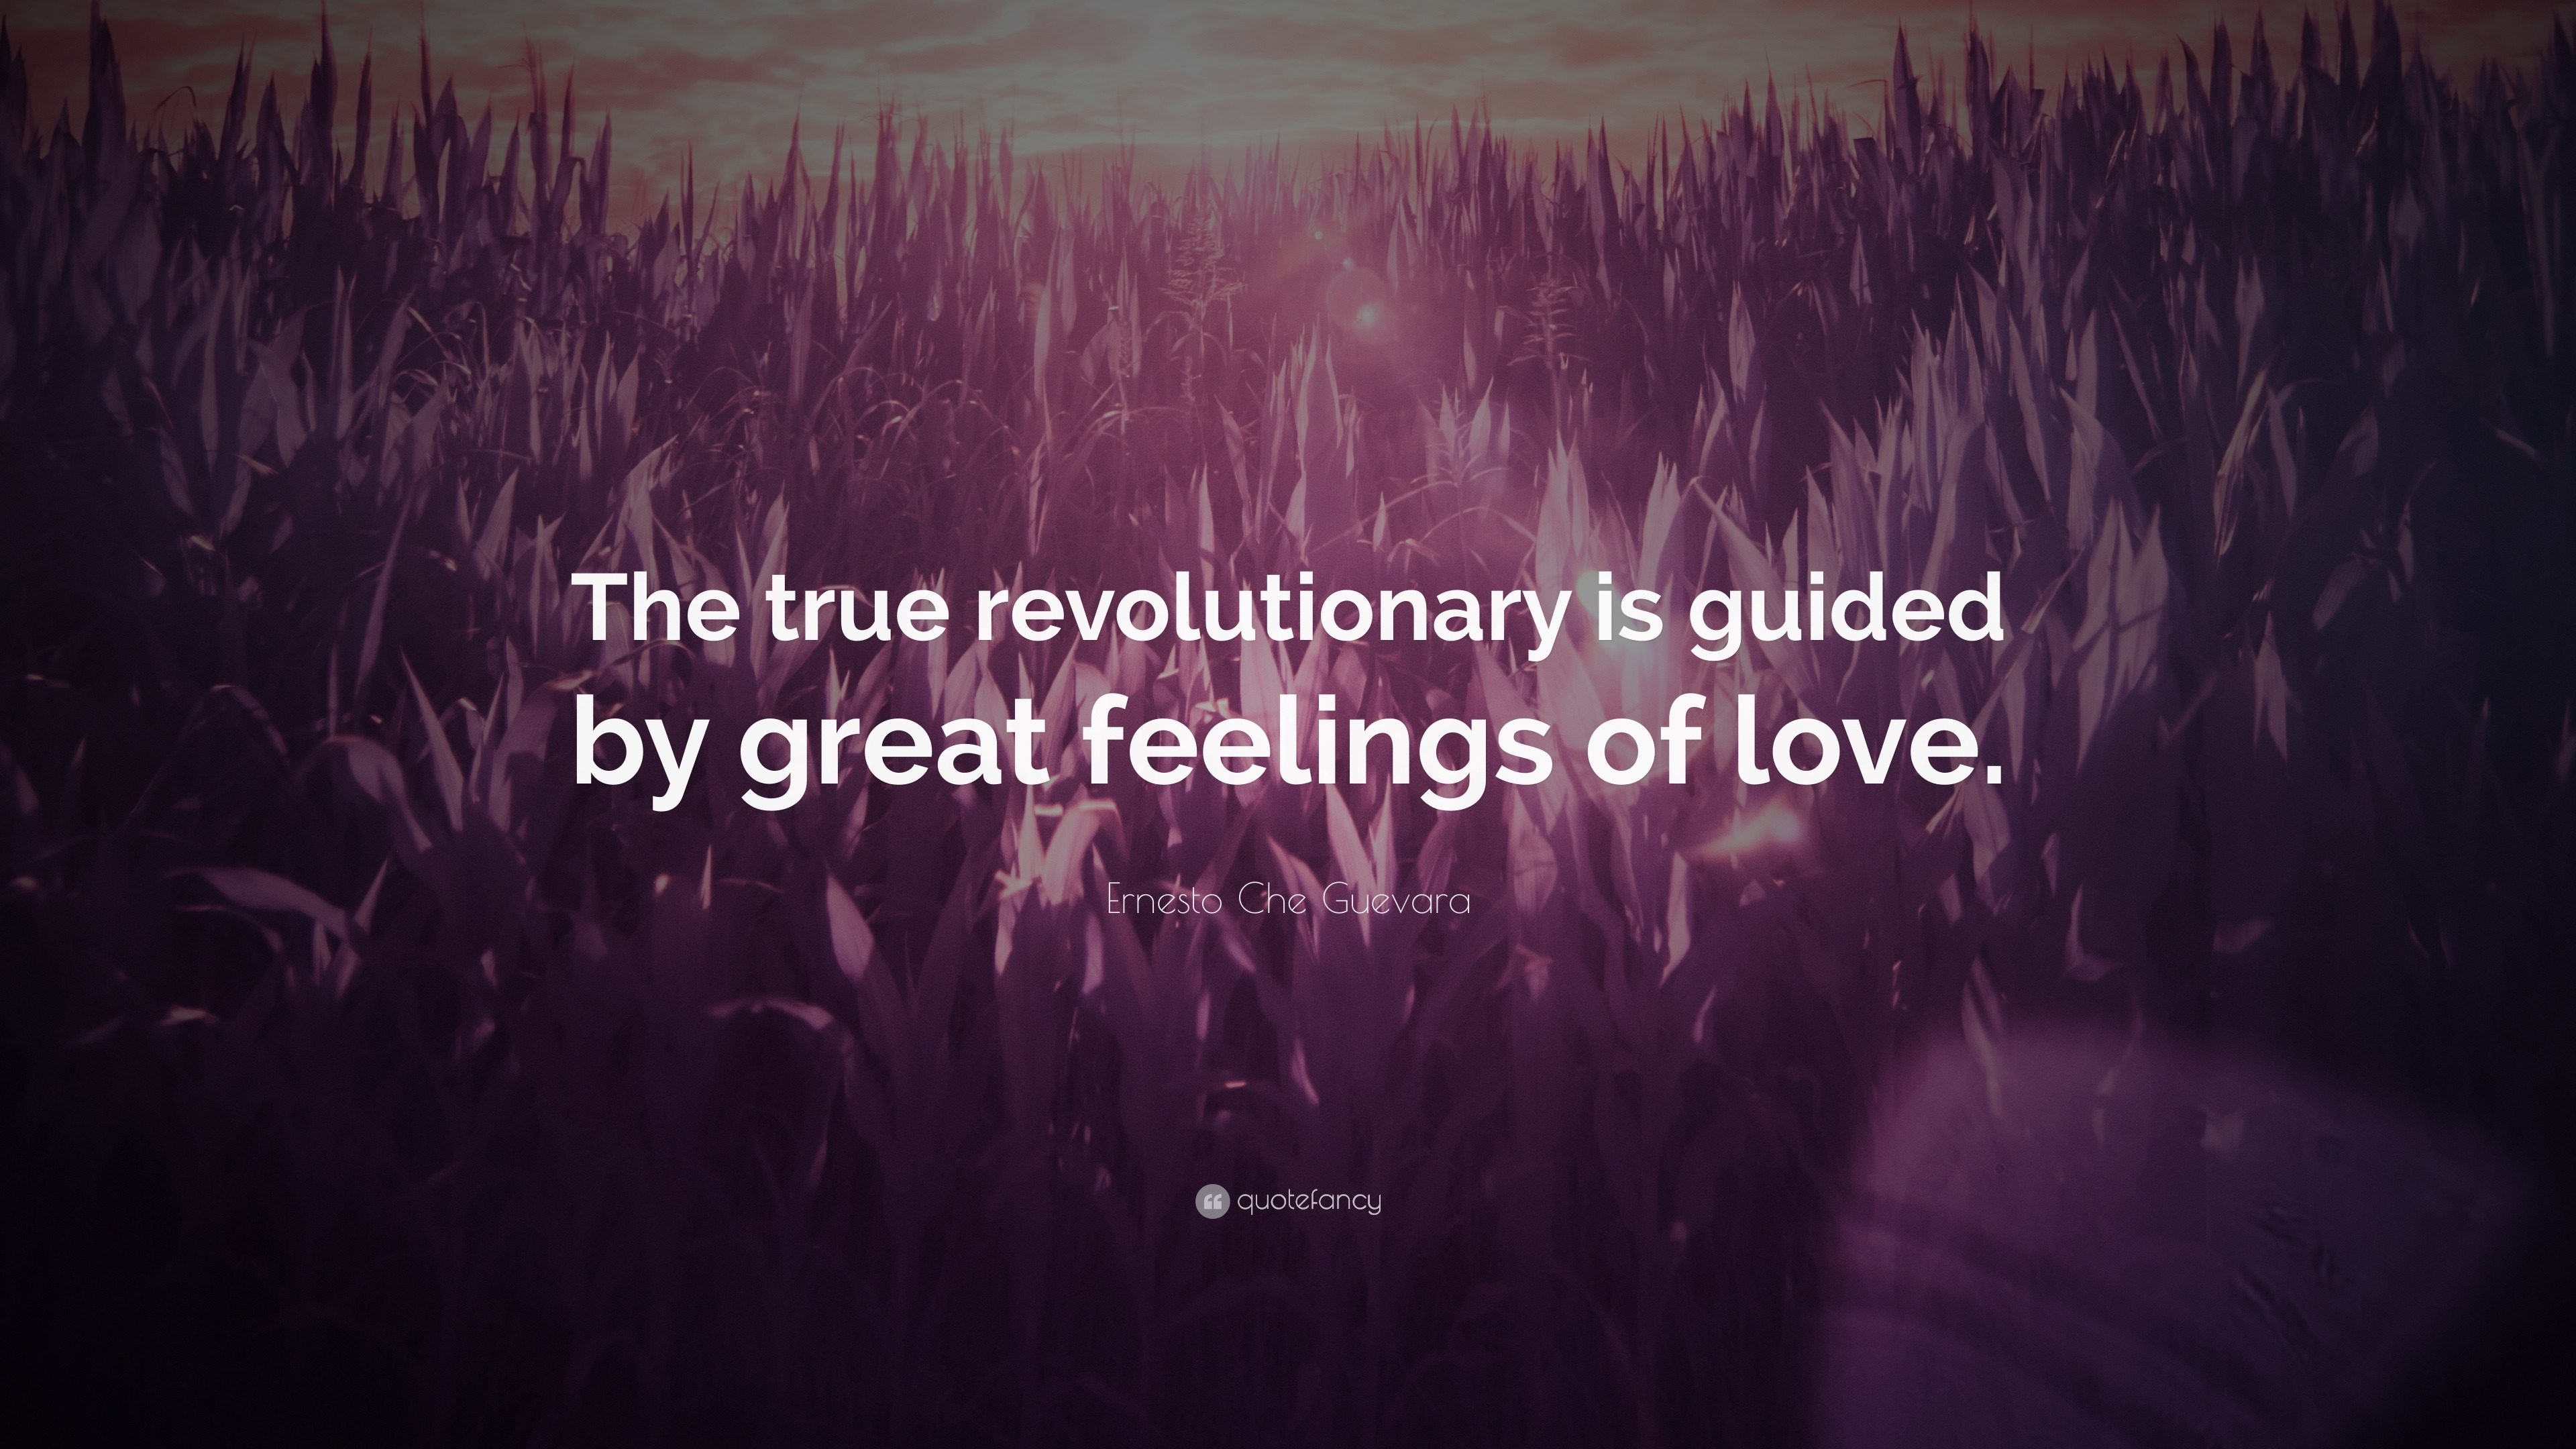 Ernesto Che Guevara Quote “The true revolutionary is guided by great feelings of love